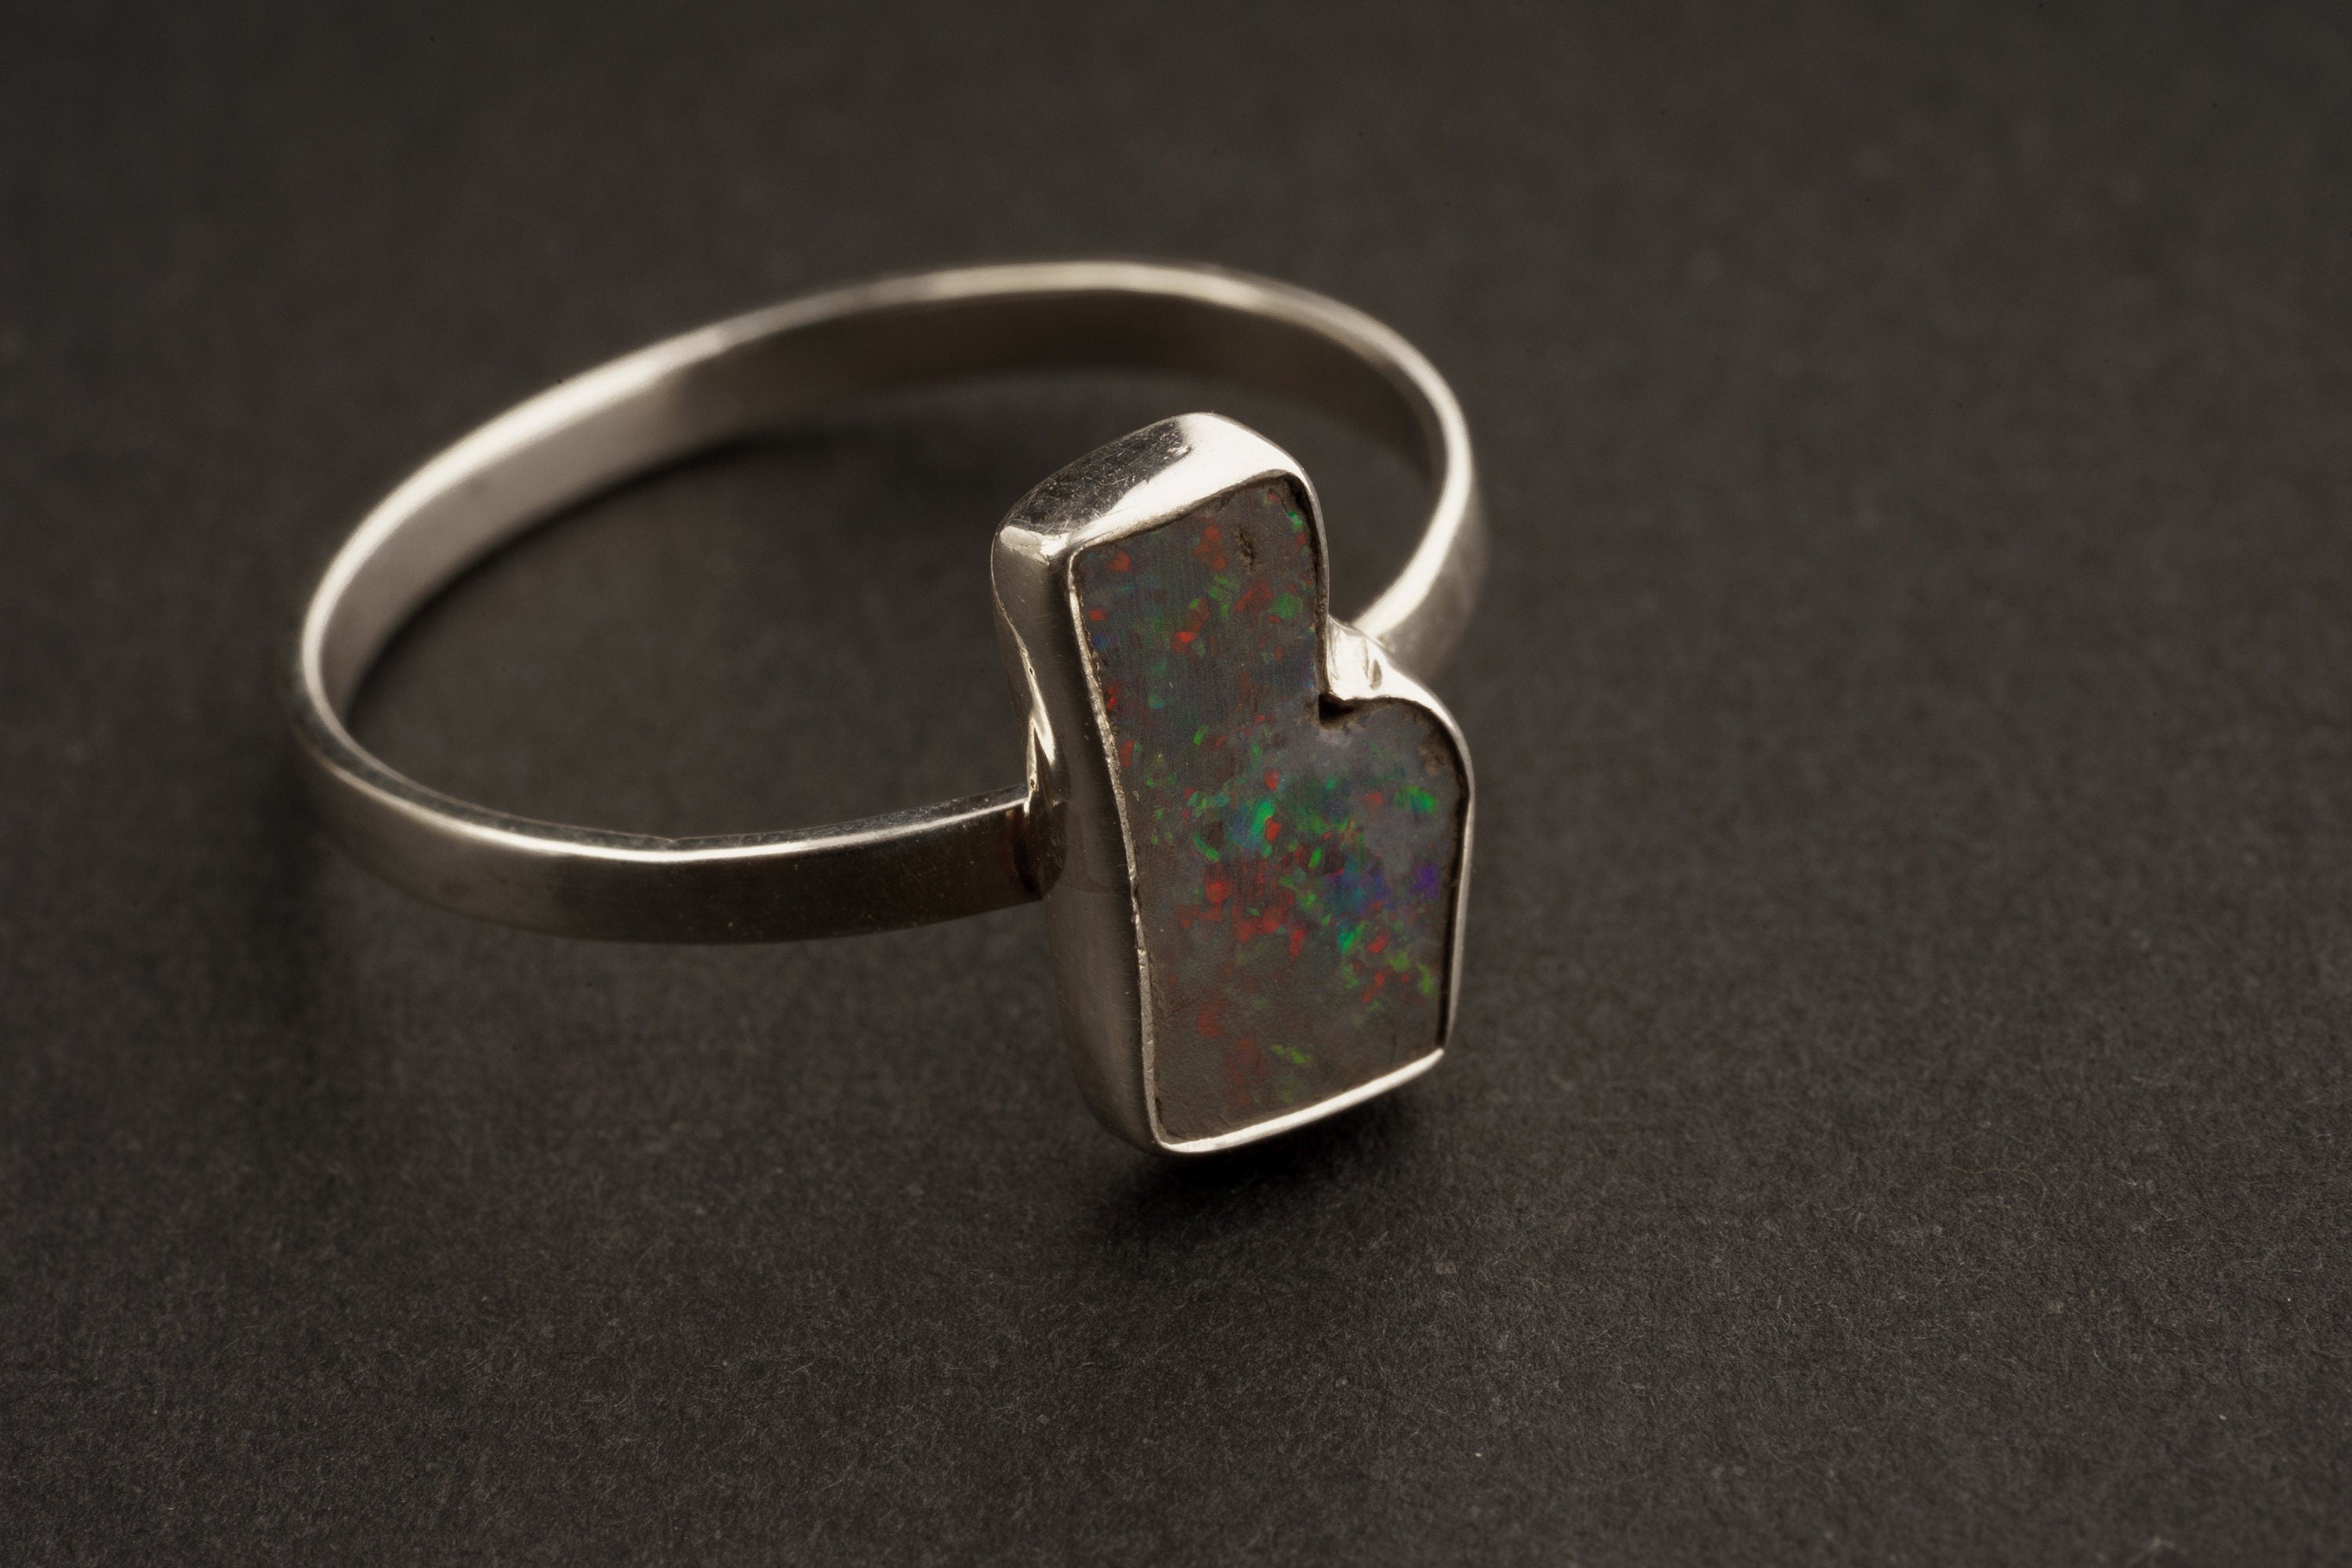 Black Australian Opal Doublet - Size 6 3/4 US - Textured Sterling Silver Ring